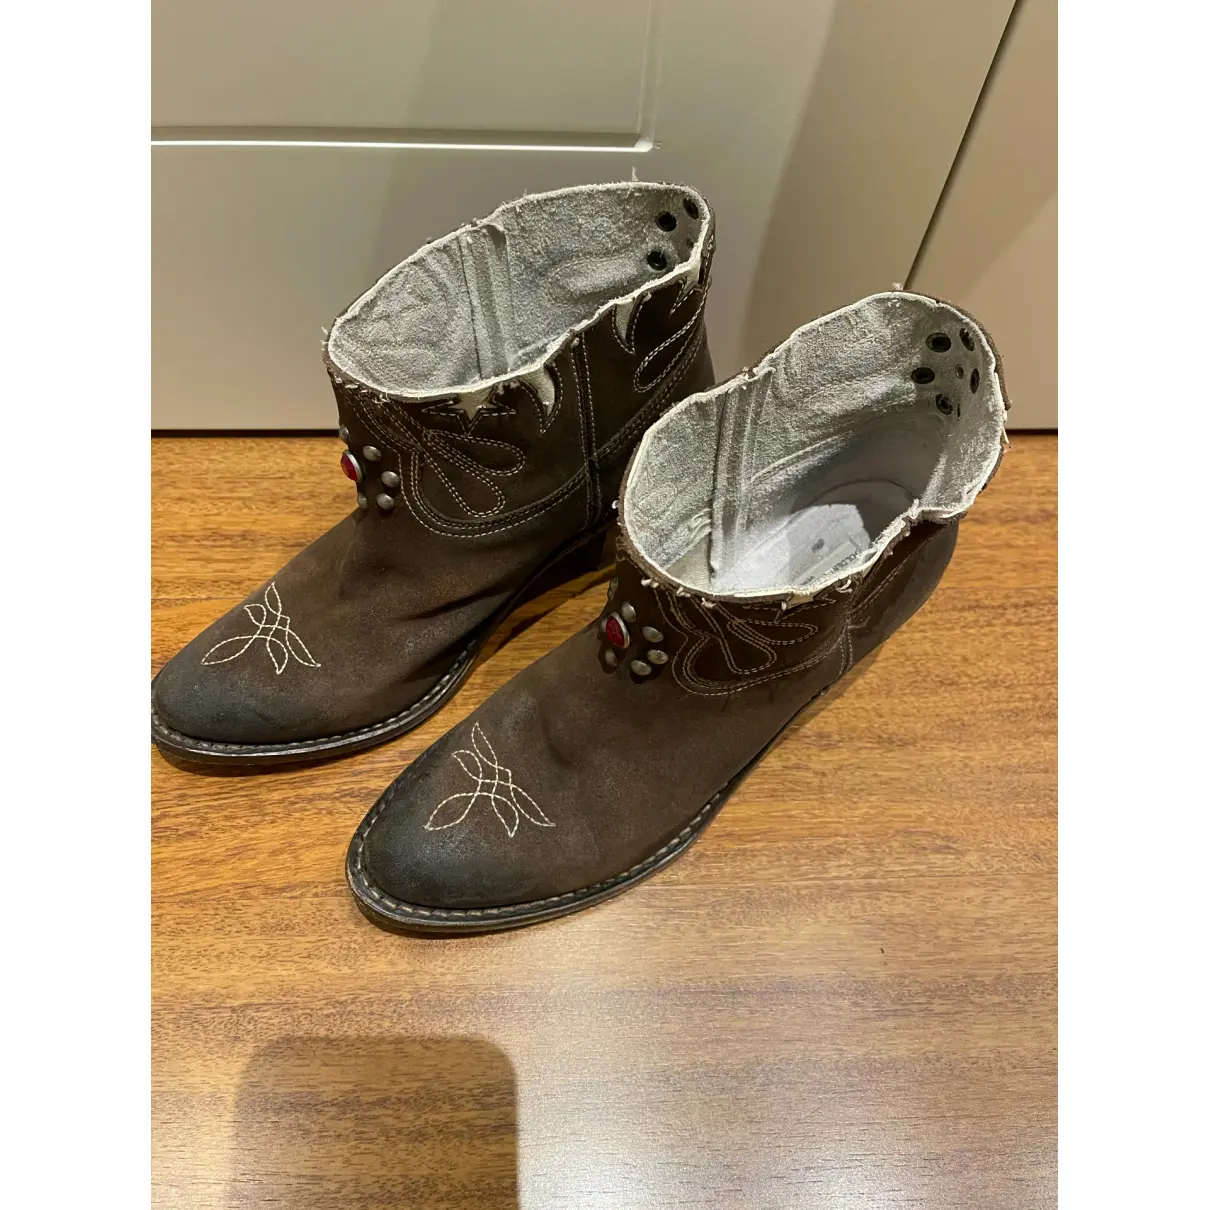 Buy Golden Goose Leather western boots online